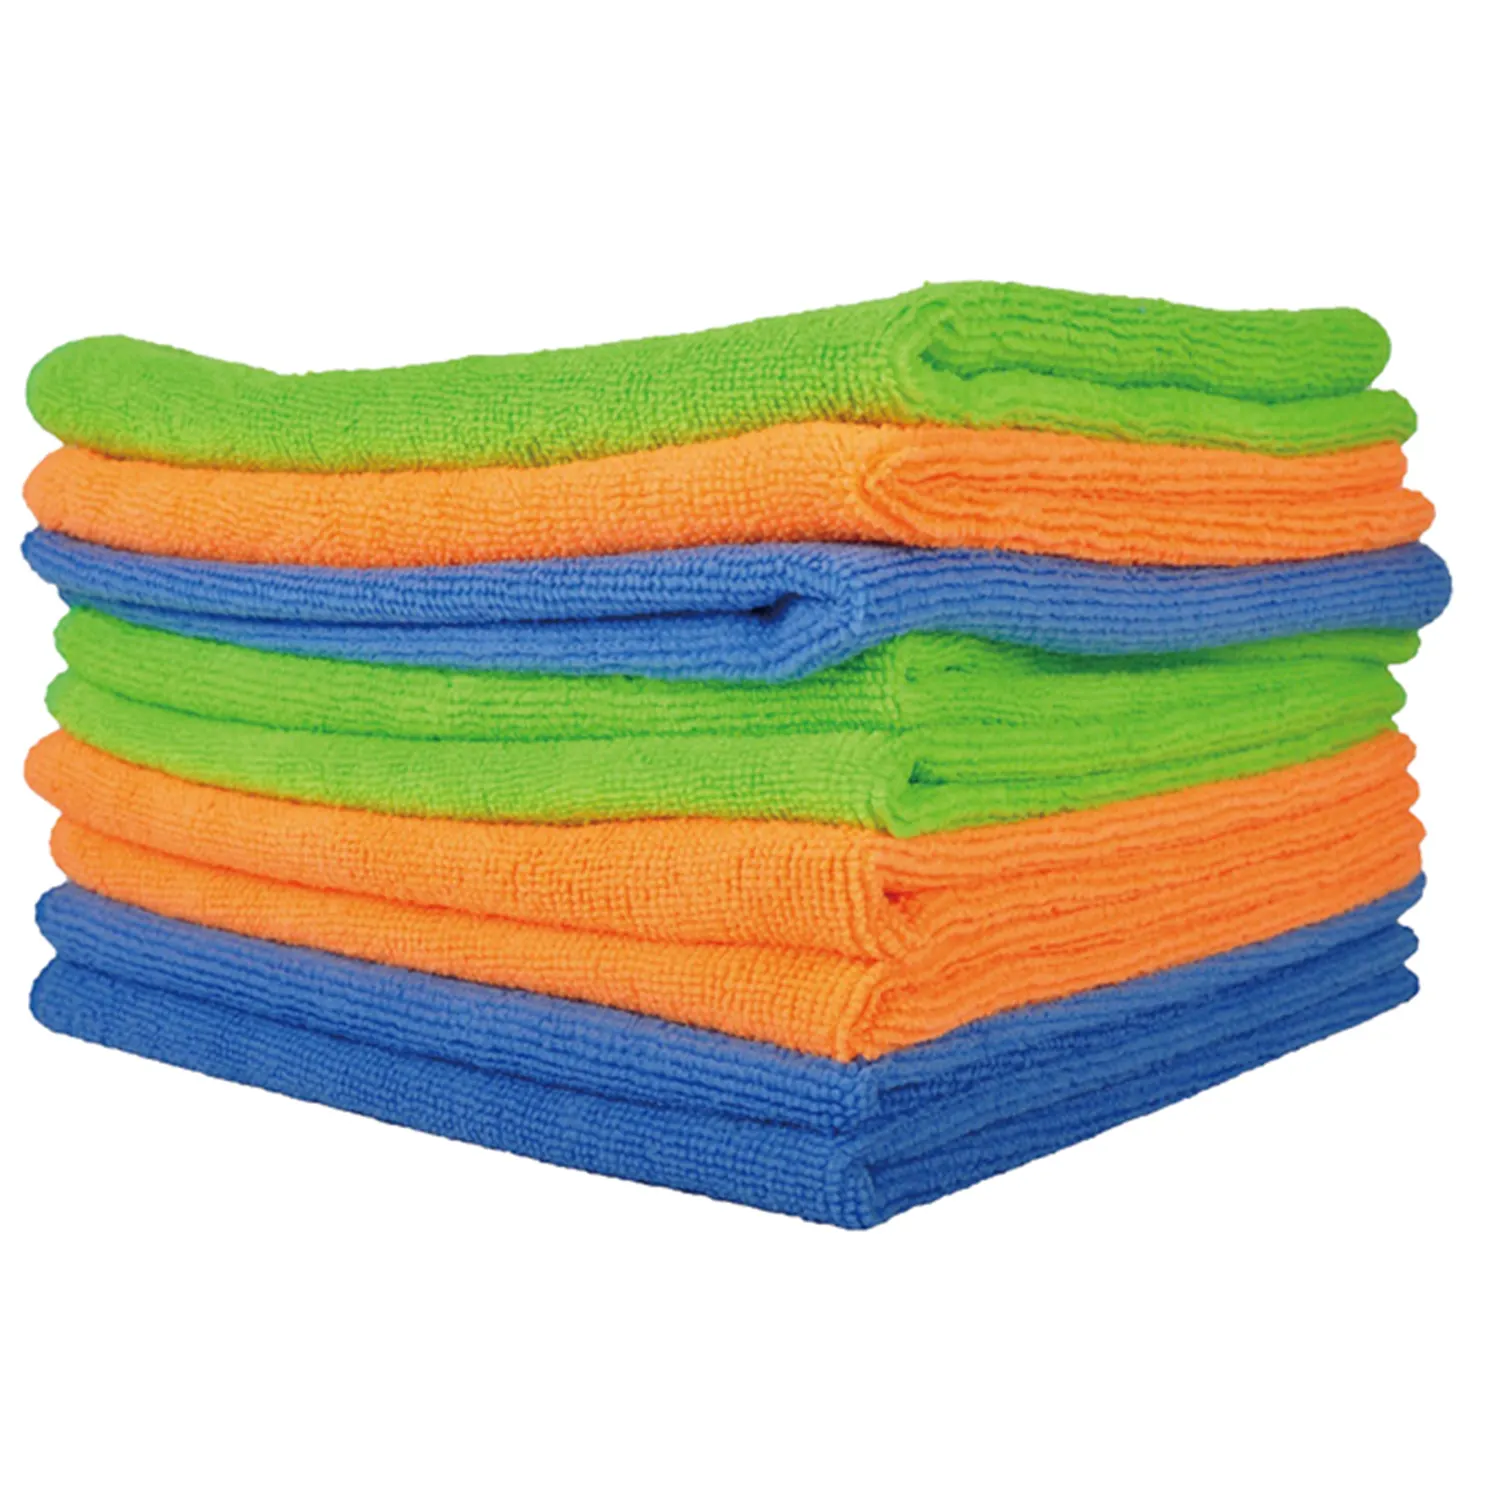 Microfiber car and glass cleaning towel wholesale cleaning supplies